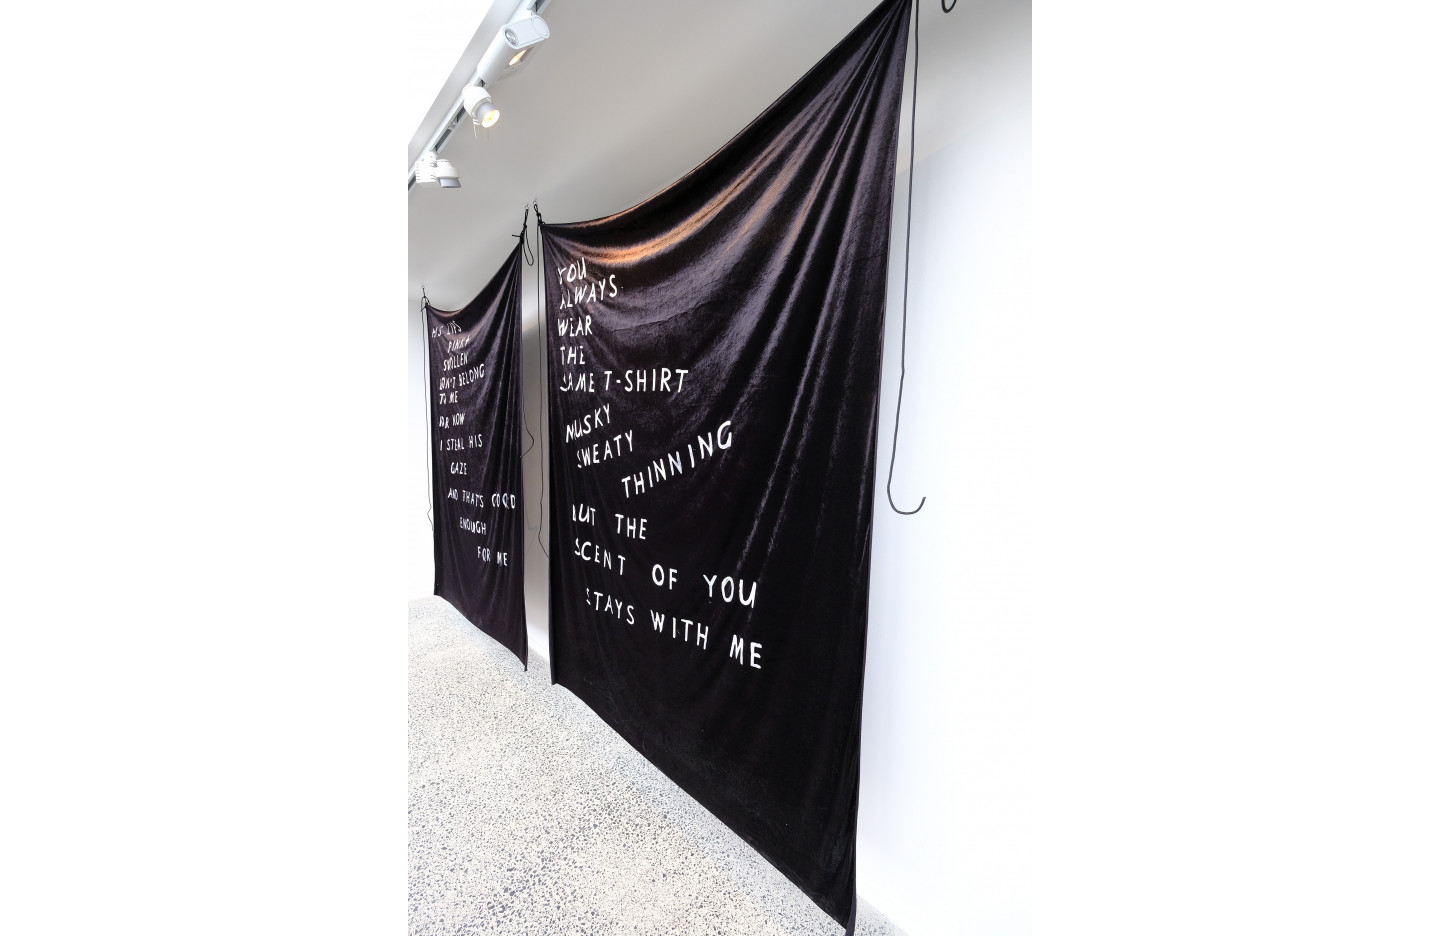 Natasha Matila-Smith, The scent of you stays with me (2018). Sleight Of Hand installation view, June 2018.